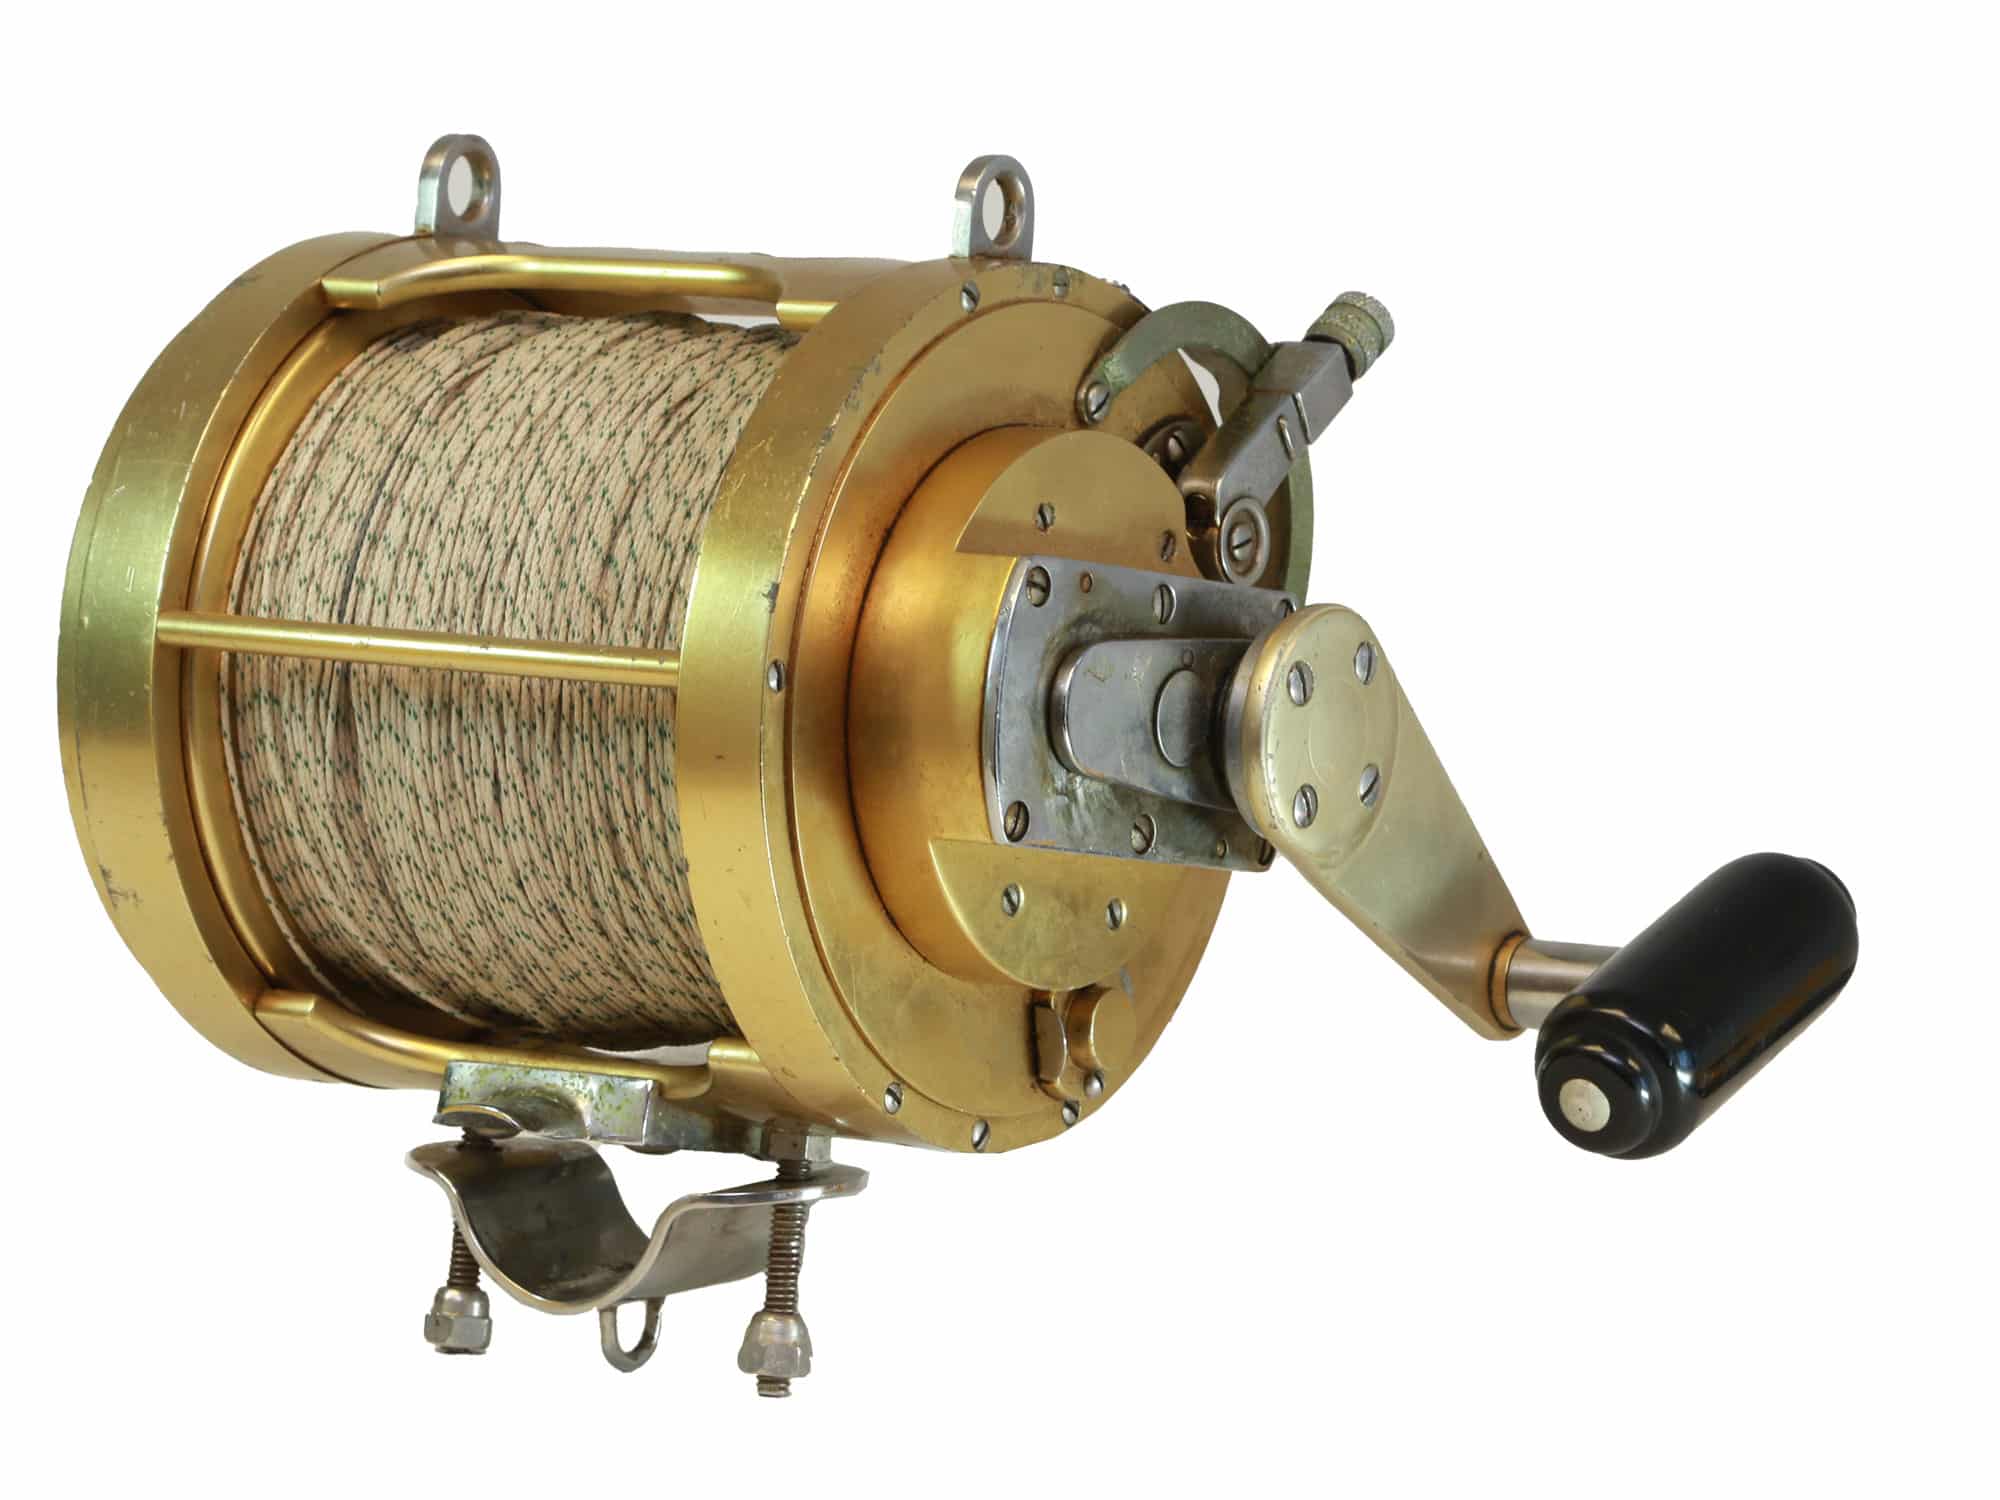 trolling reels, trolling reels Suppliers and Manufacturers at